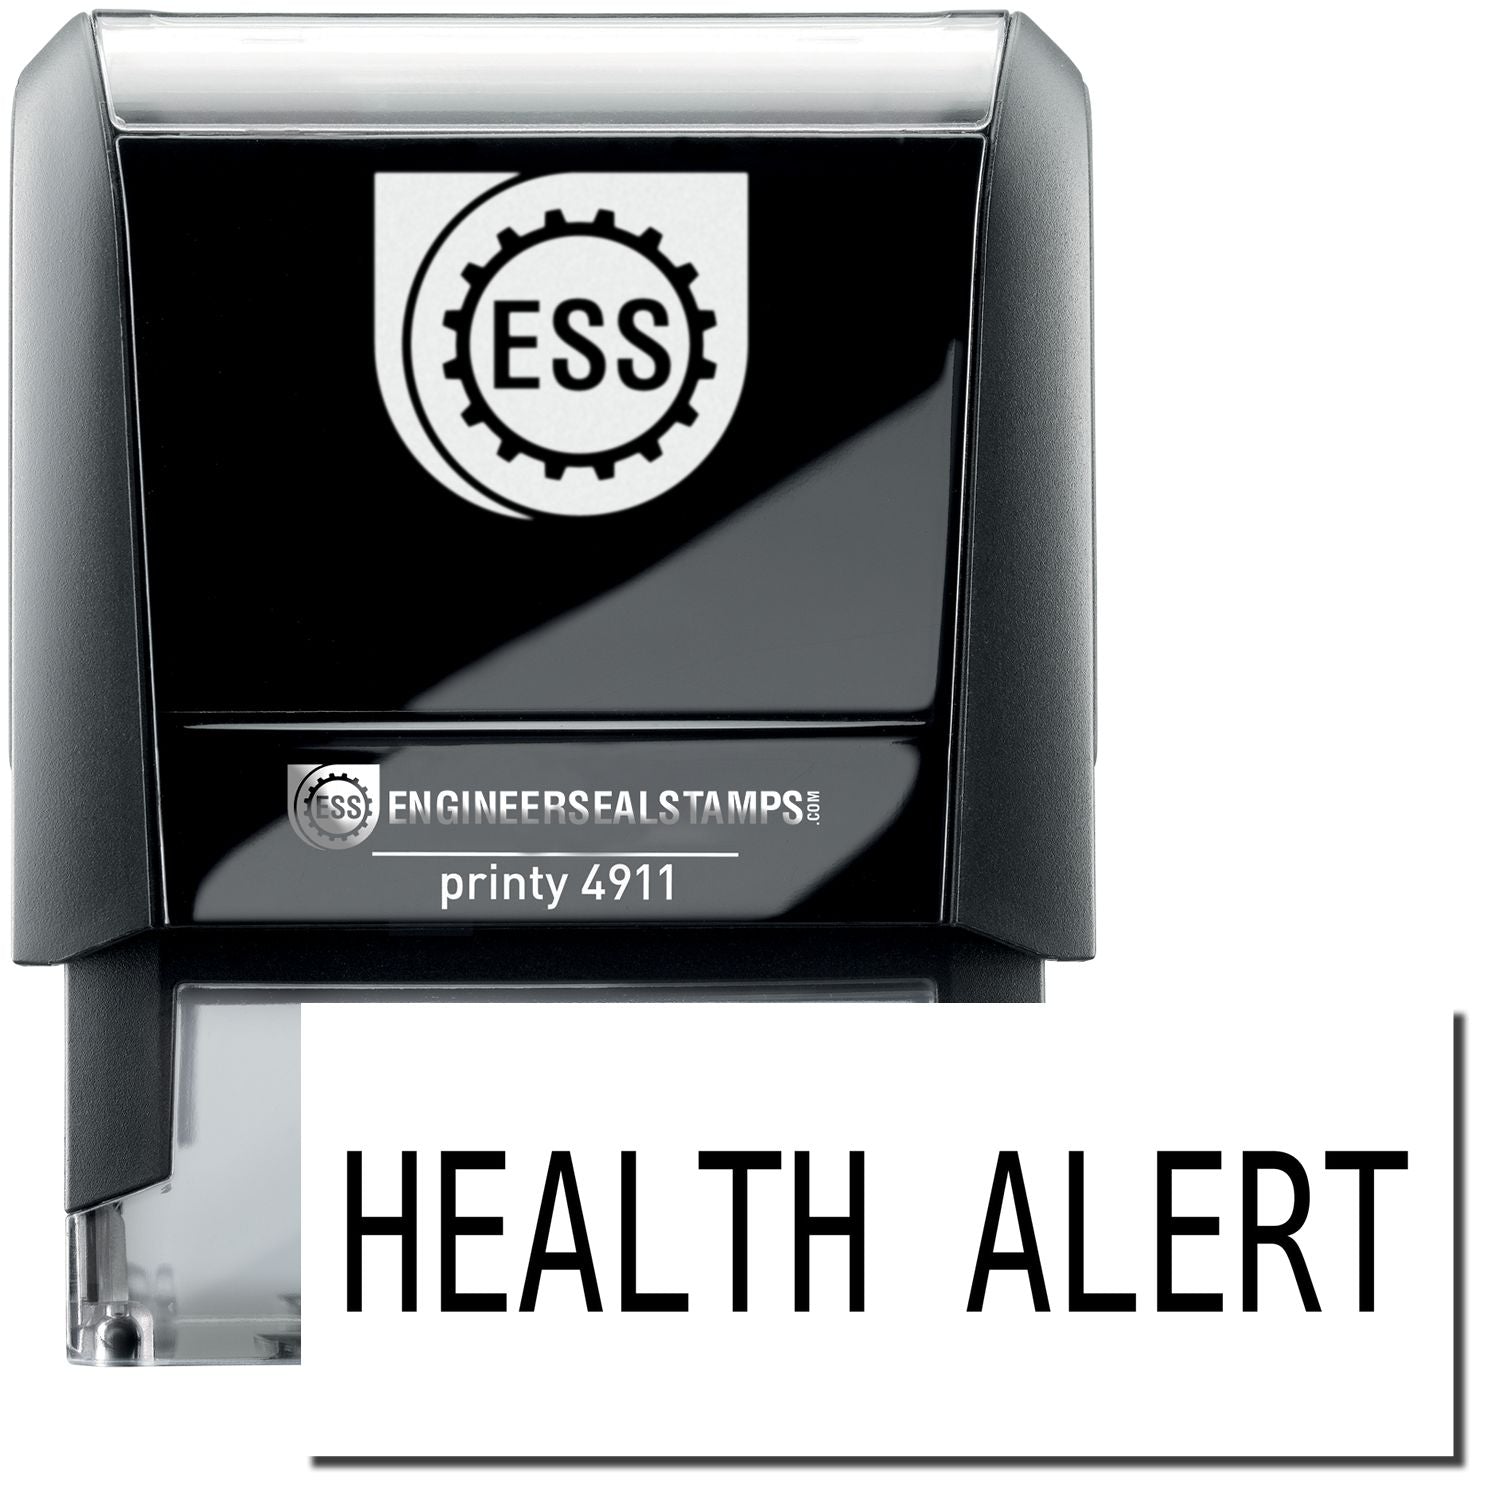 A self-inking stamp with a stamped image showing how the text "HEALTH ALERT" is displayed after stamping.